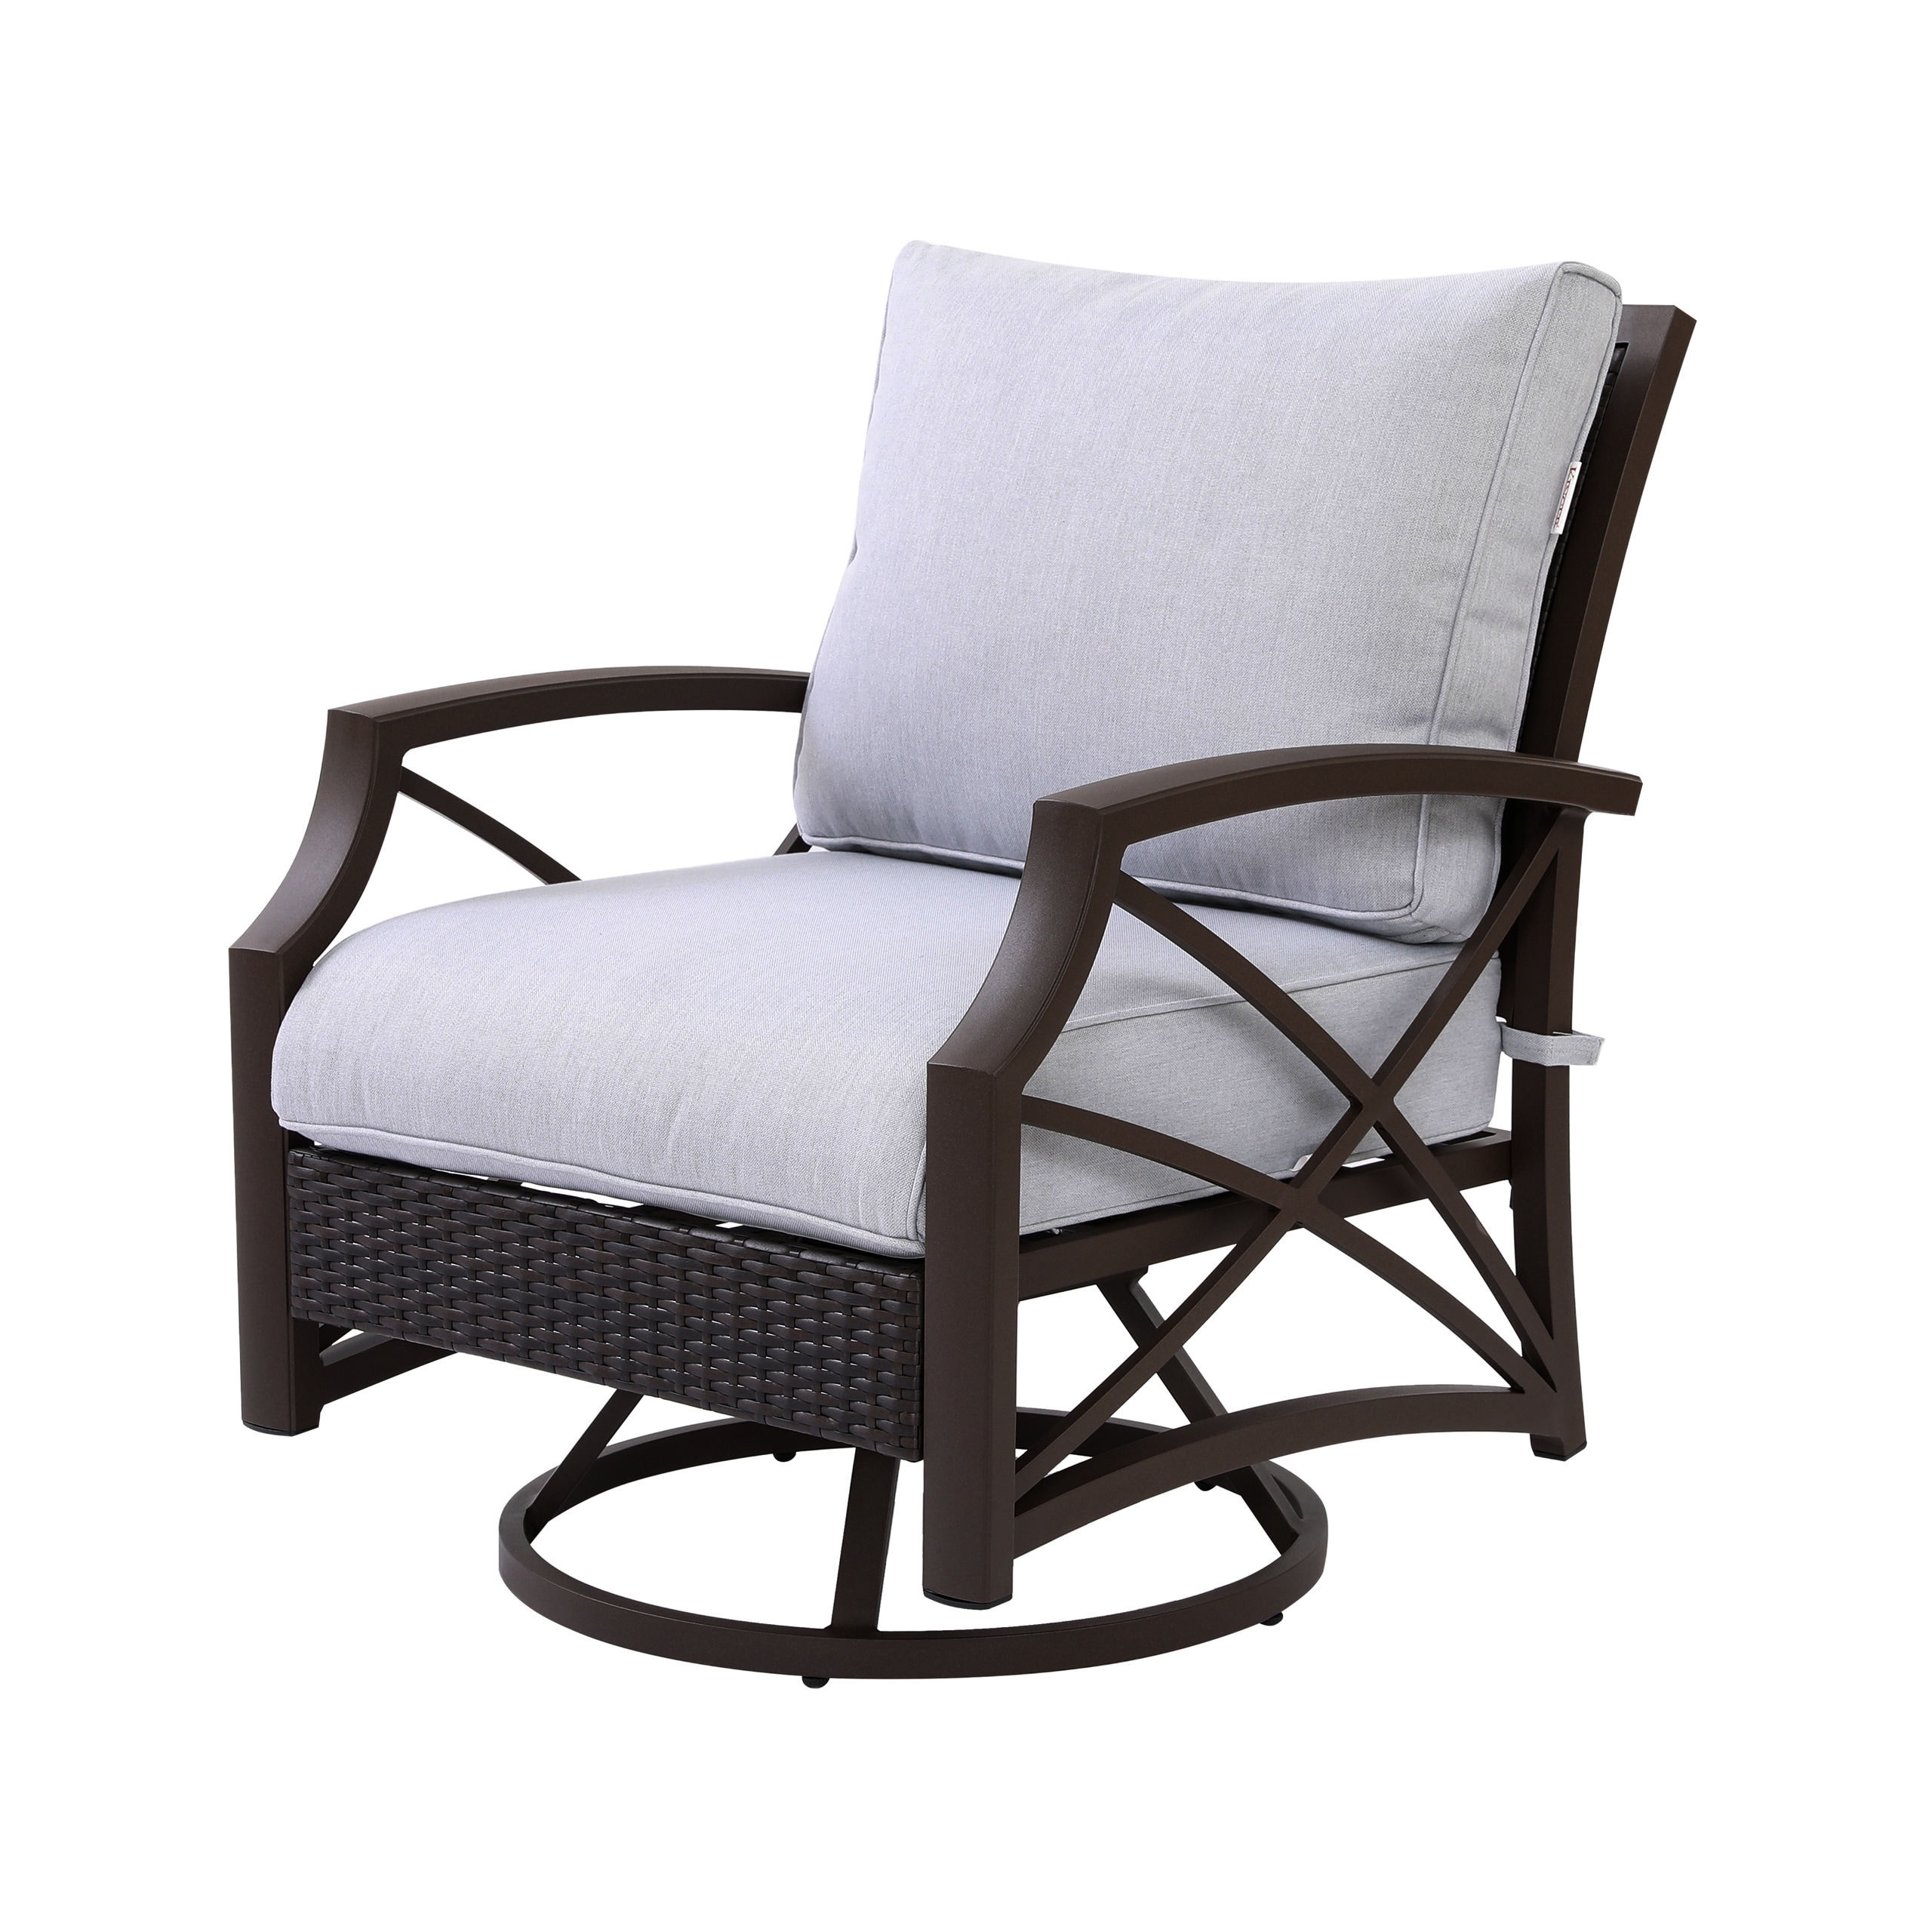 Outdoor Swivel Chairs For Patio